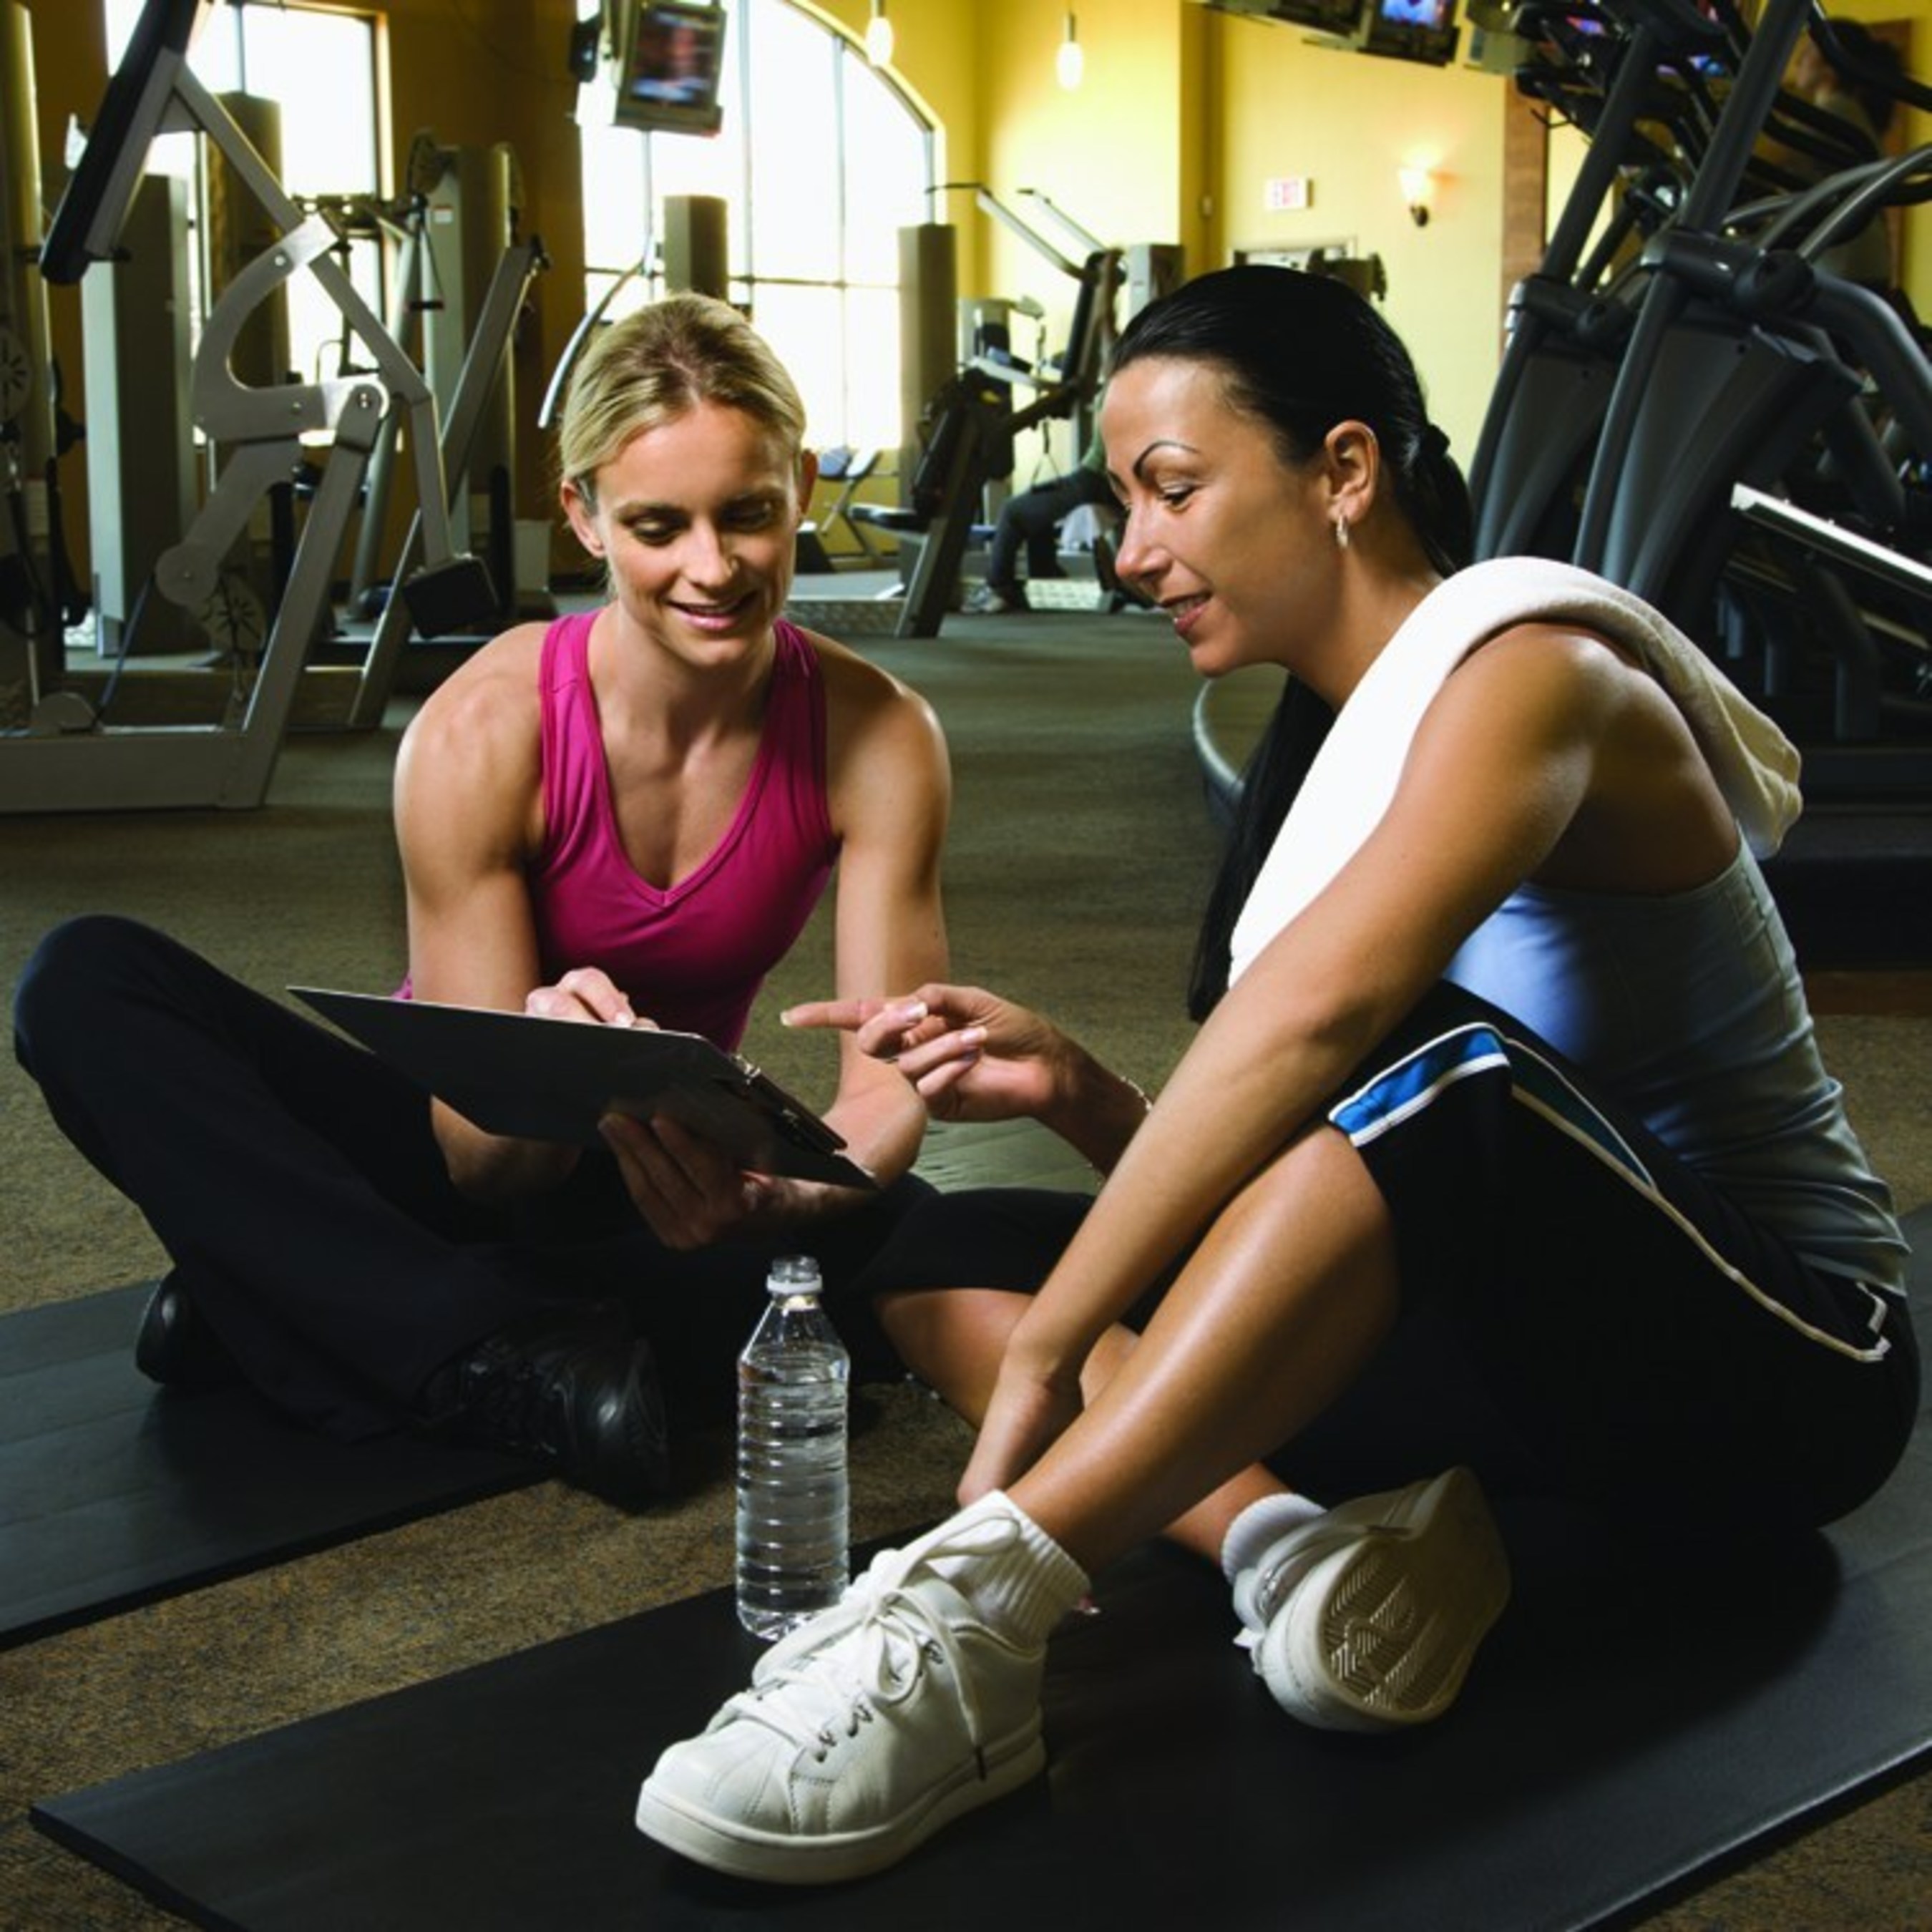 "NASM's Behavior Change Specialization was created to help Certified Personal Trainers identify their client's ability to change and immediately put into practice the appropriate intervention techniques aligned with their needs," said Erin McGill, senior director of product development at NASM, M.A. in Sport and Exercise Psychology.